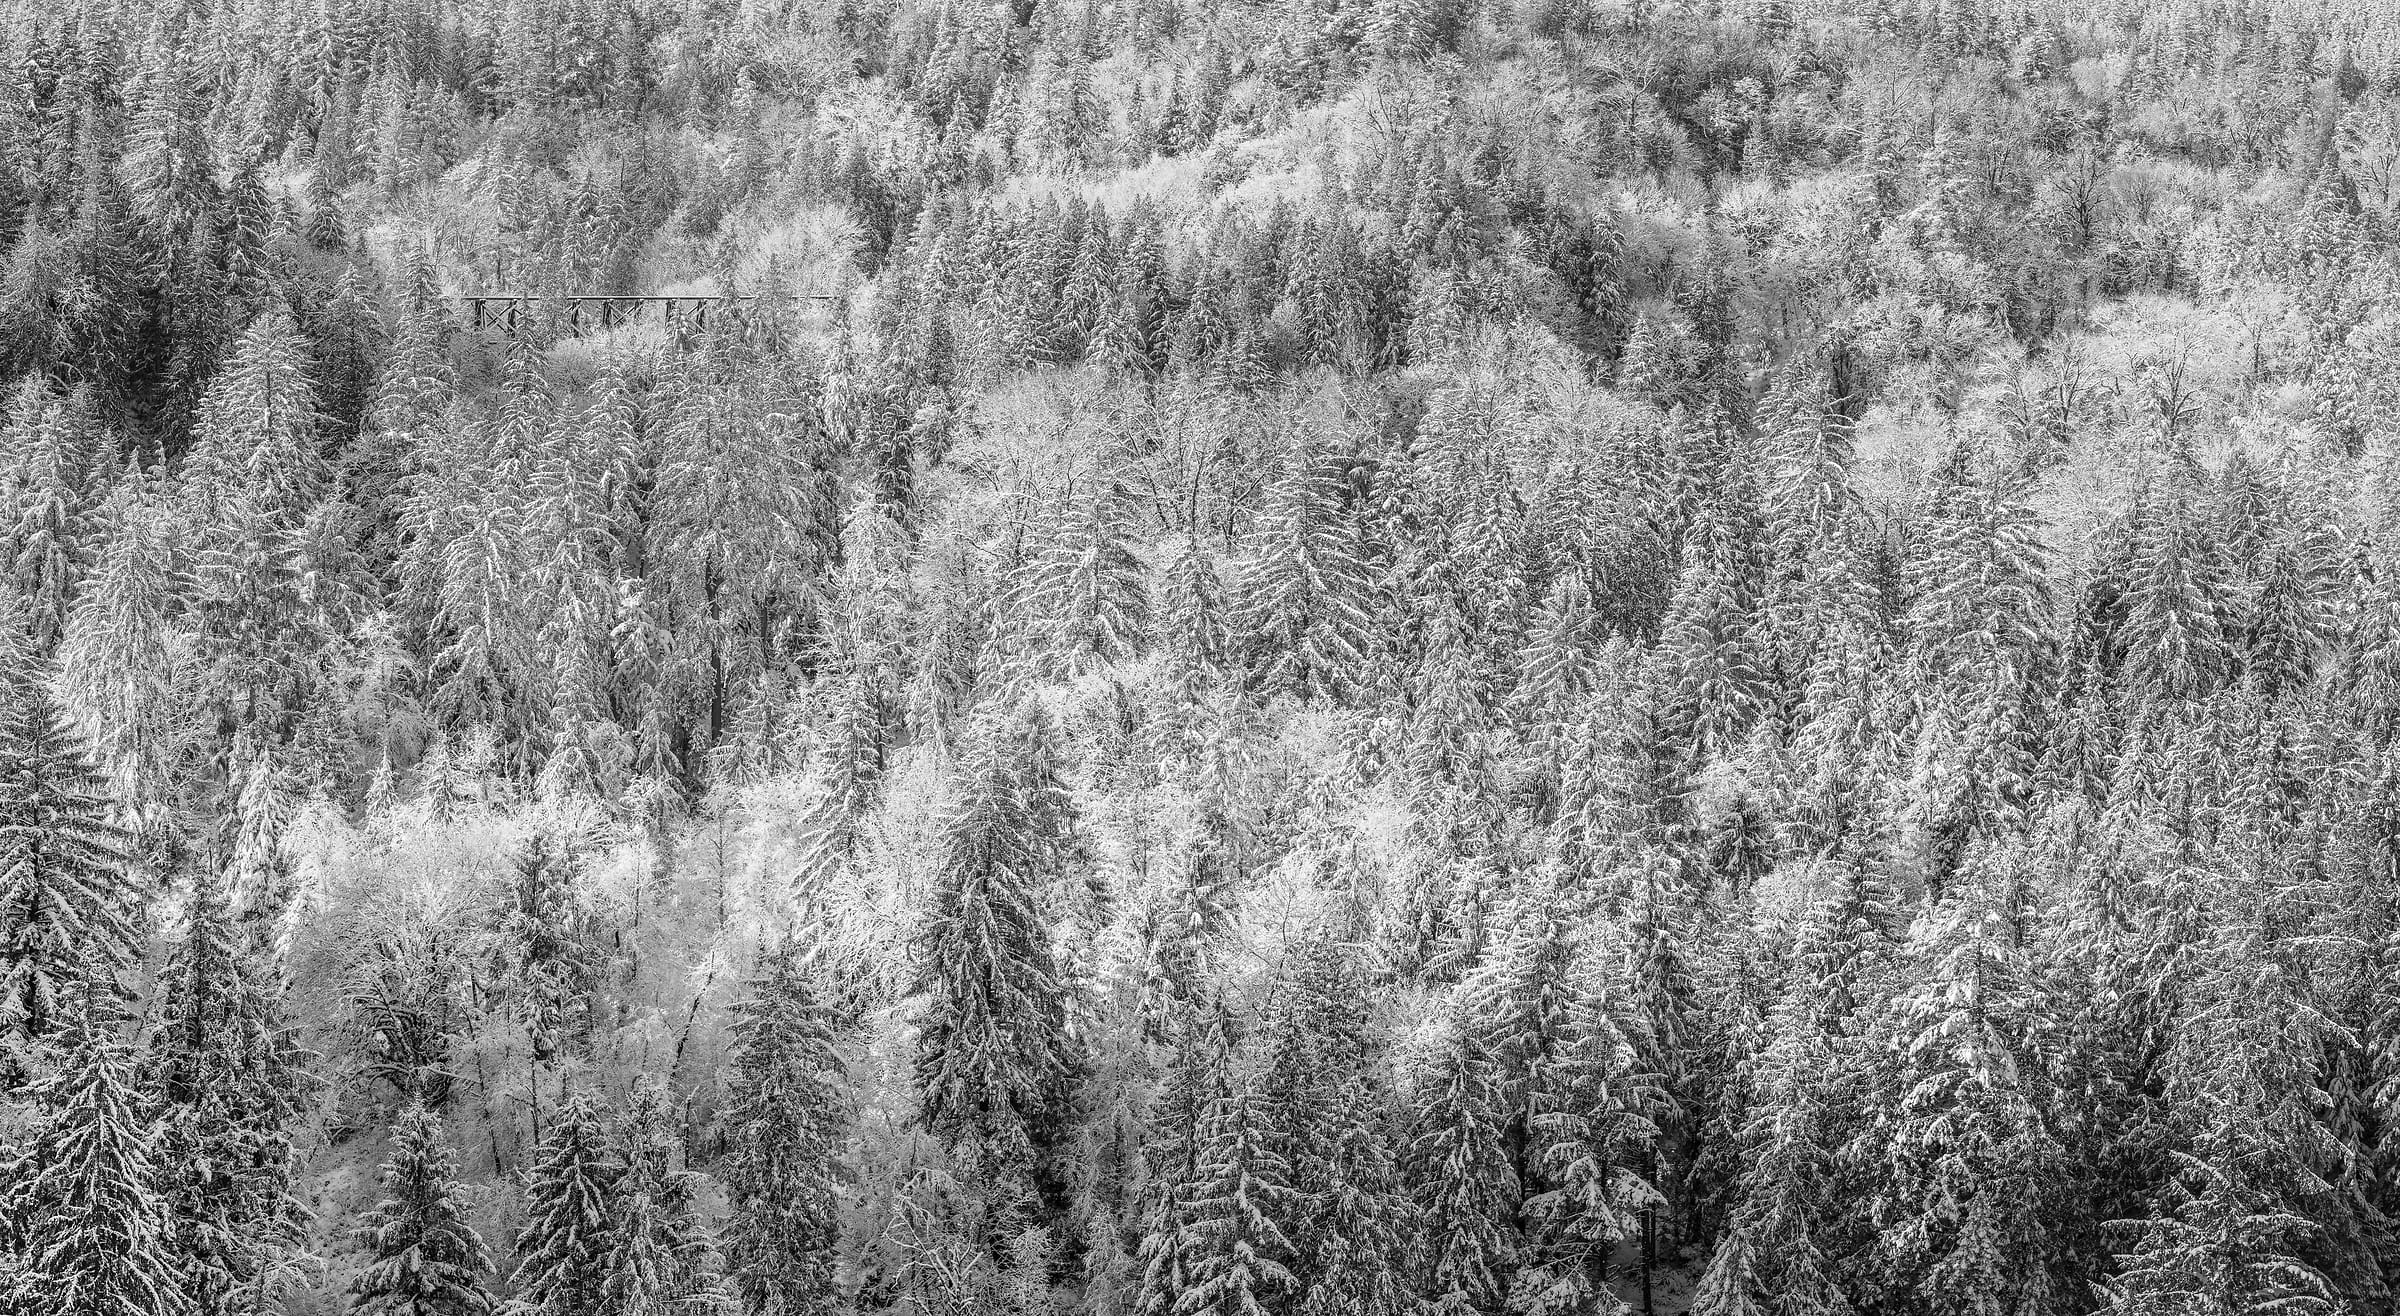 372 megapixels! A very high resolution, large-format VAST photo print of a winter forest scene with trees that have snow on them; black & white landscape photograph created by Scott Rinckenberger in Snoqualmie Falls, Snoqualmie, Washington